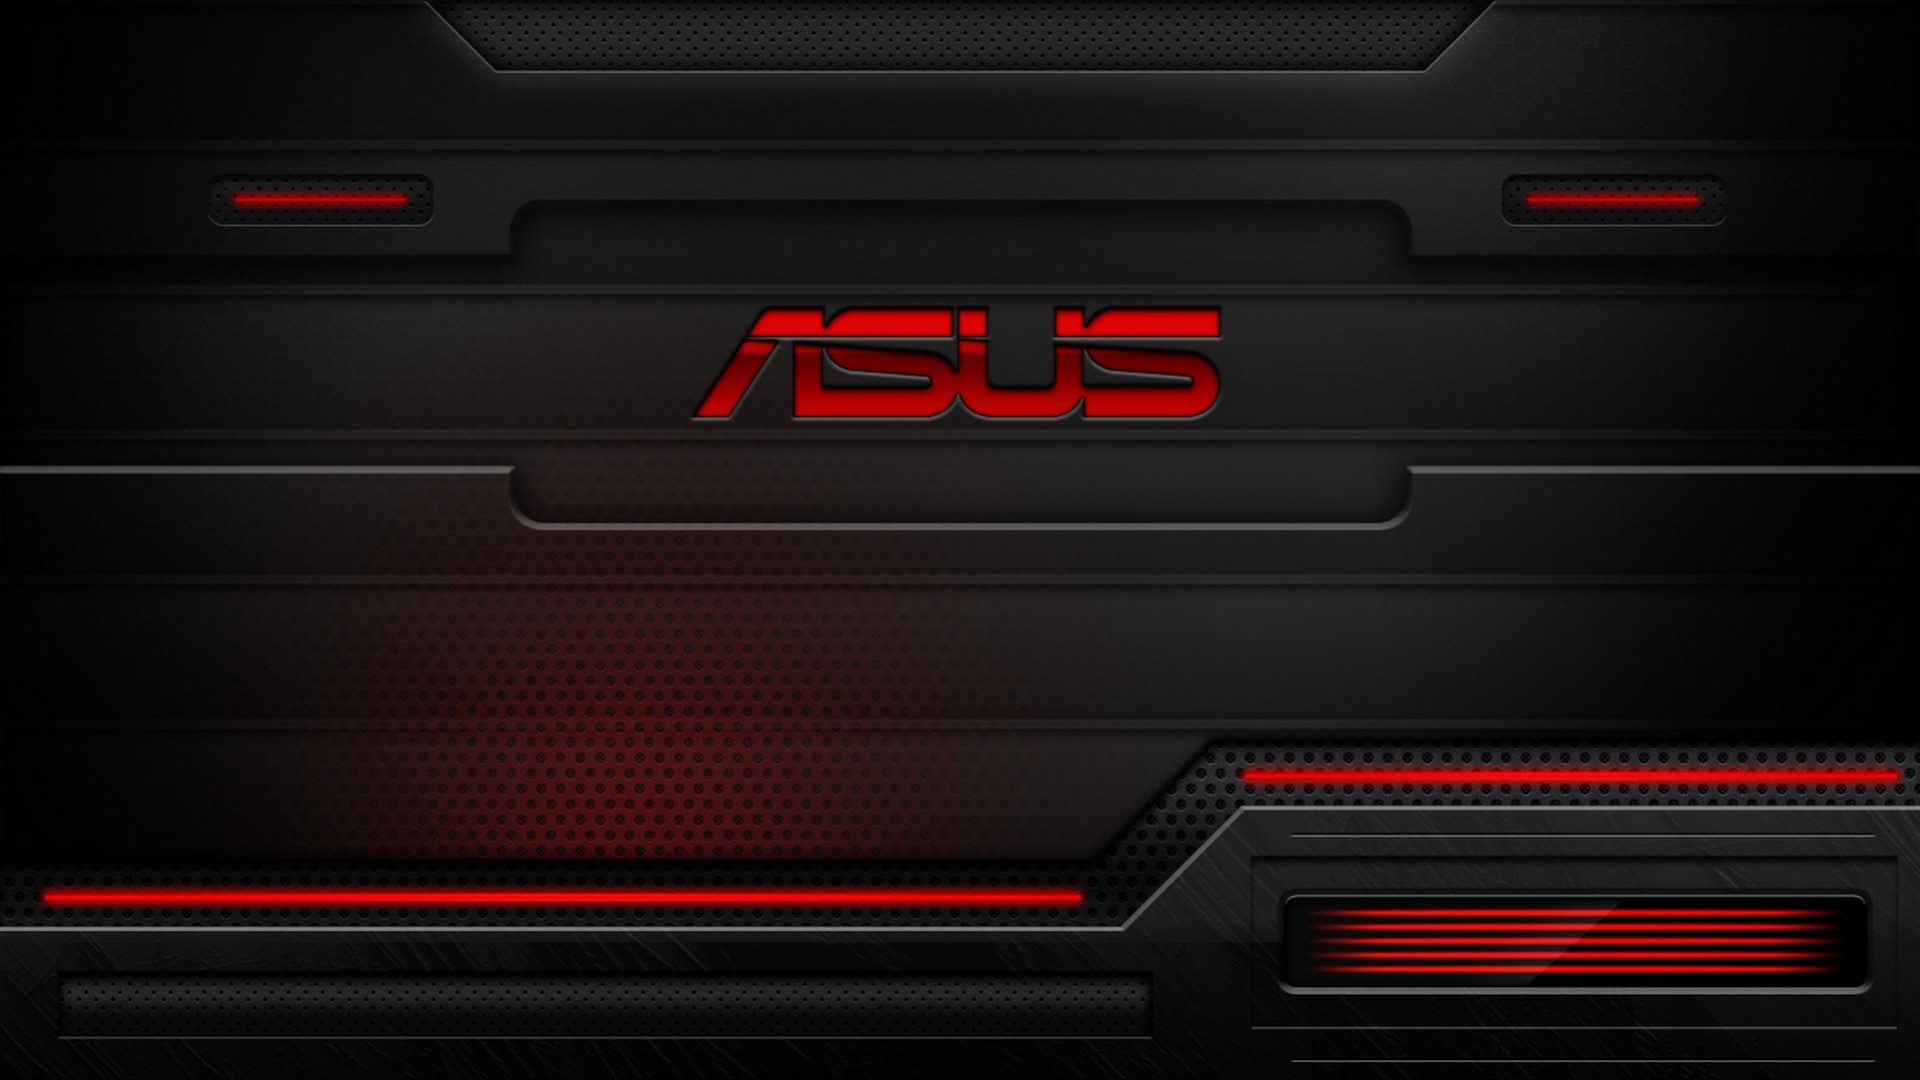 HD Red and Black Asus Technology Wallpaper for Desktop Full Size ...